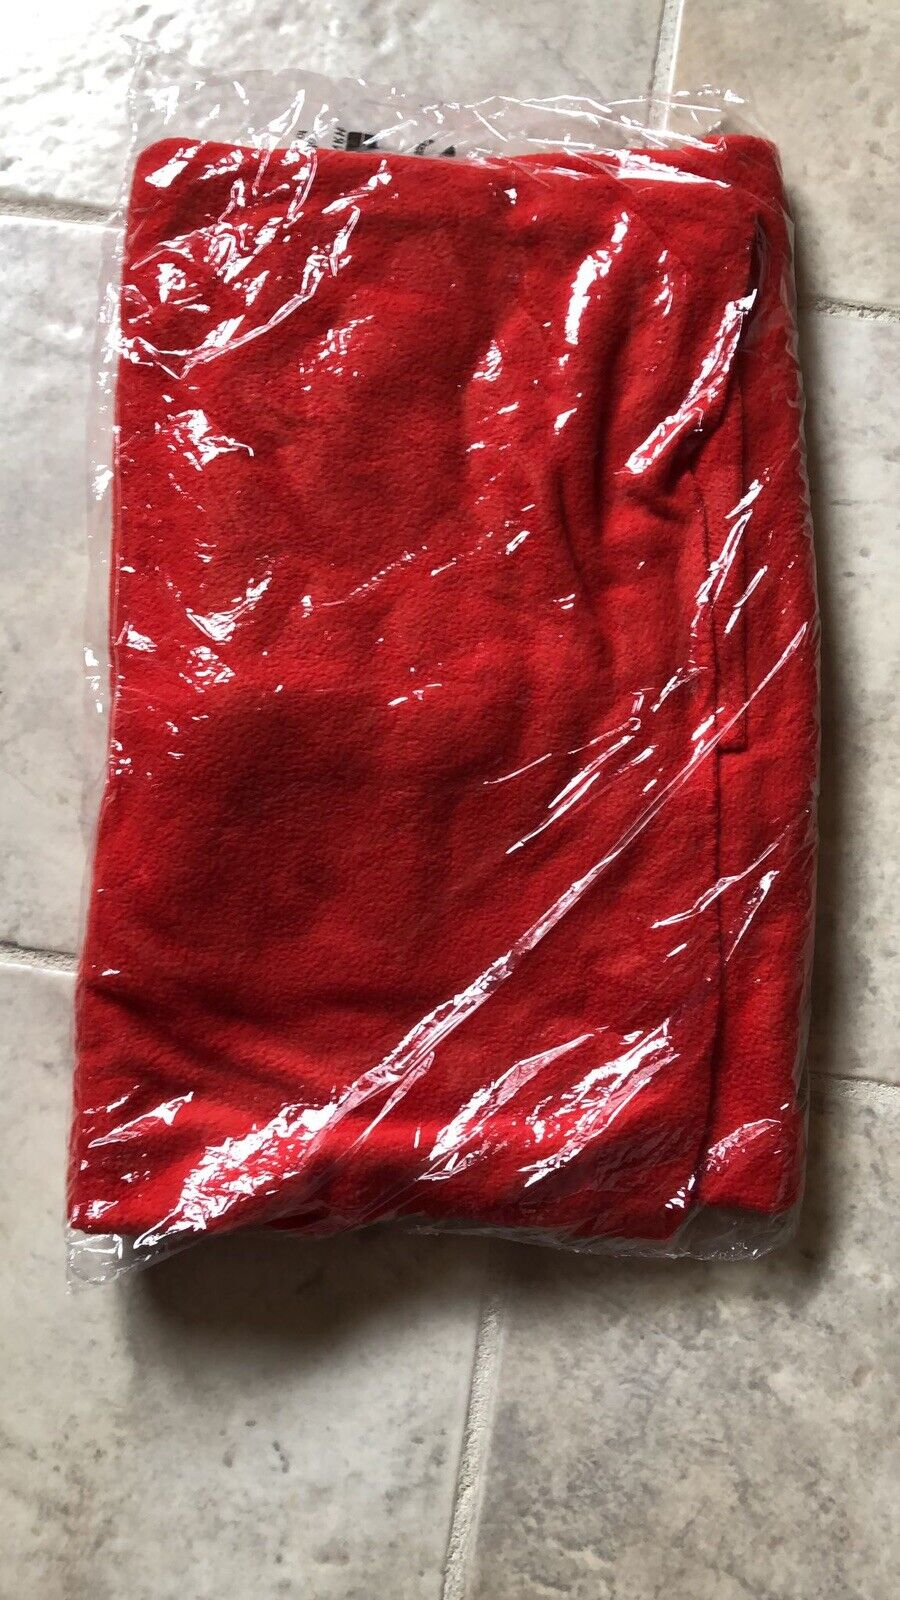 AIR FRANCE red fleece airline blanket current issue travel throw 36 x 52 NEW